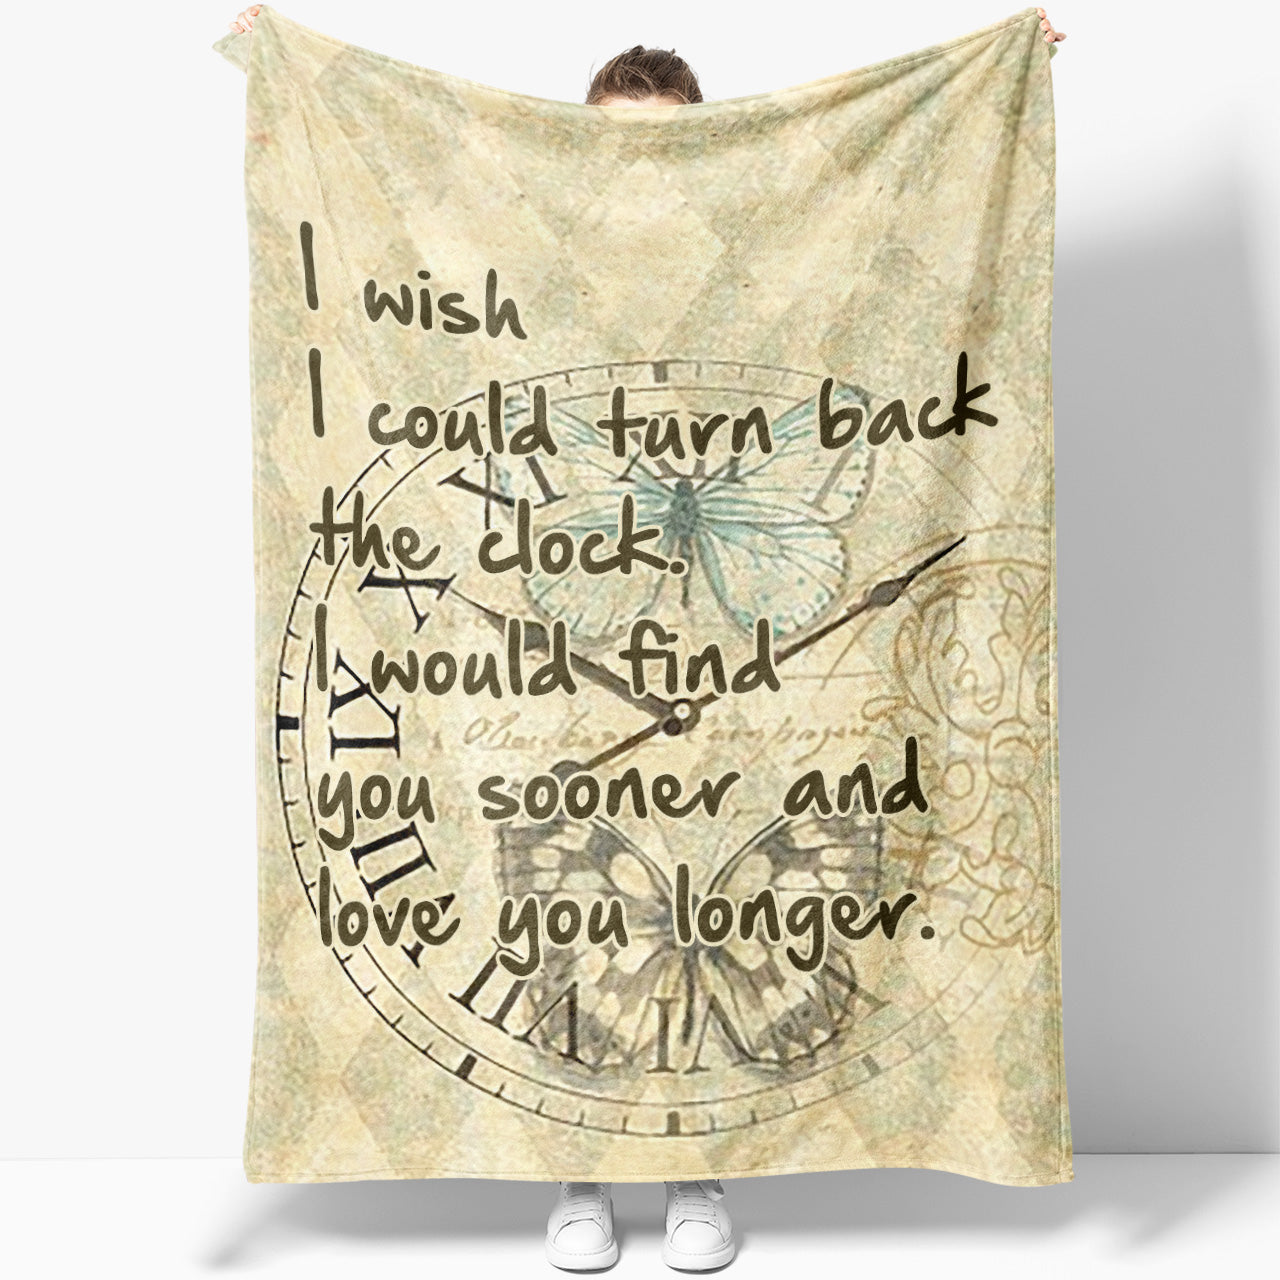 Blanket Gift For Him, Gift For Boyfriend, Valentines Day Gifts For Him, Turn Back The Clock